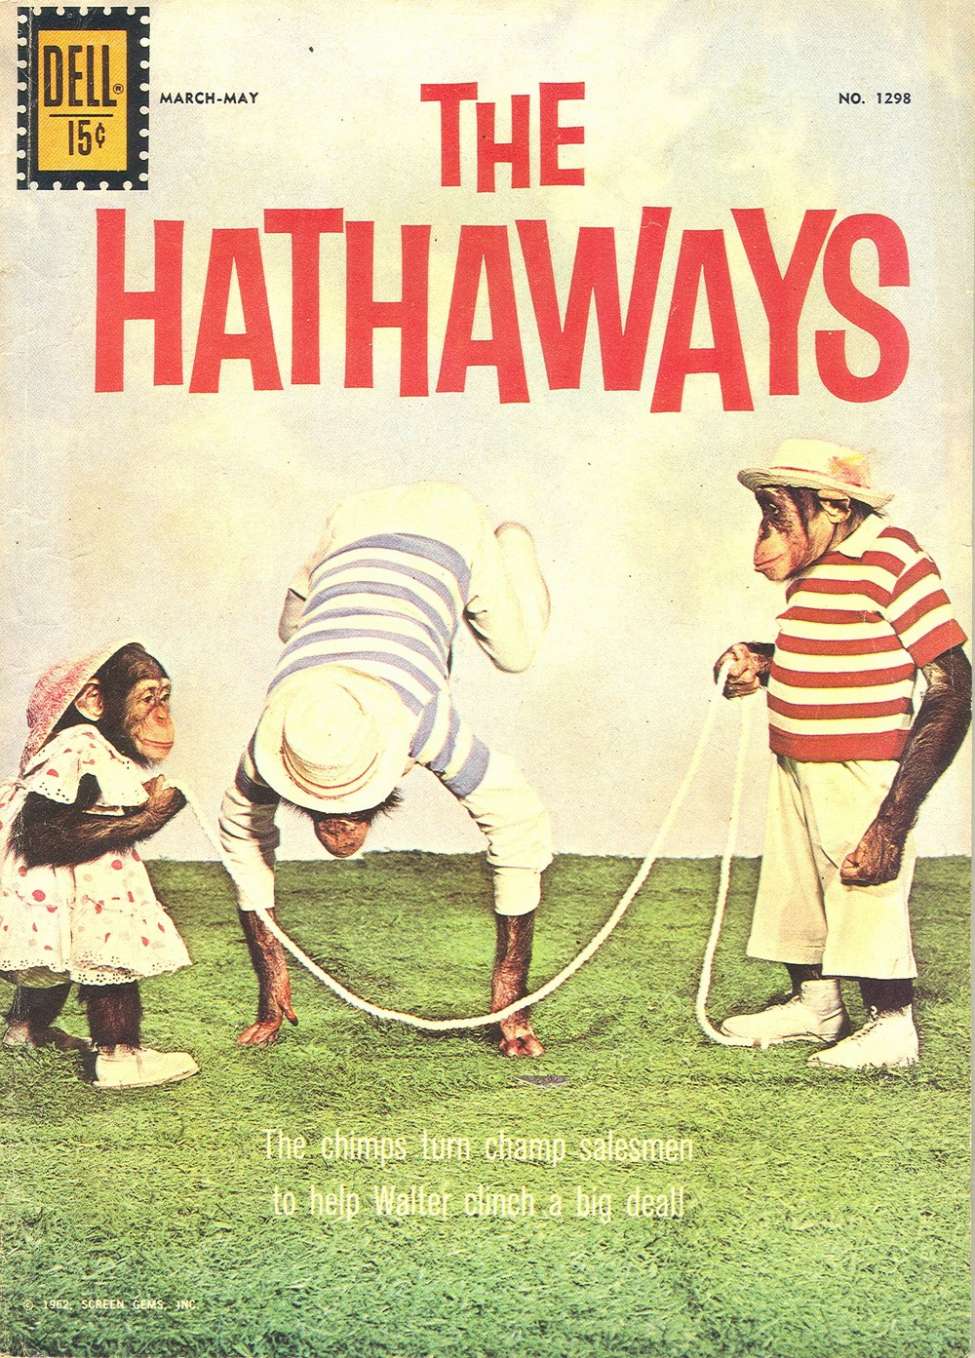 Book Cover For 1298 - The Hathaways